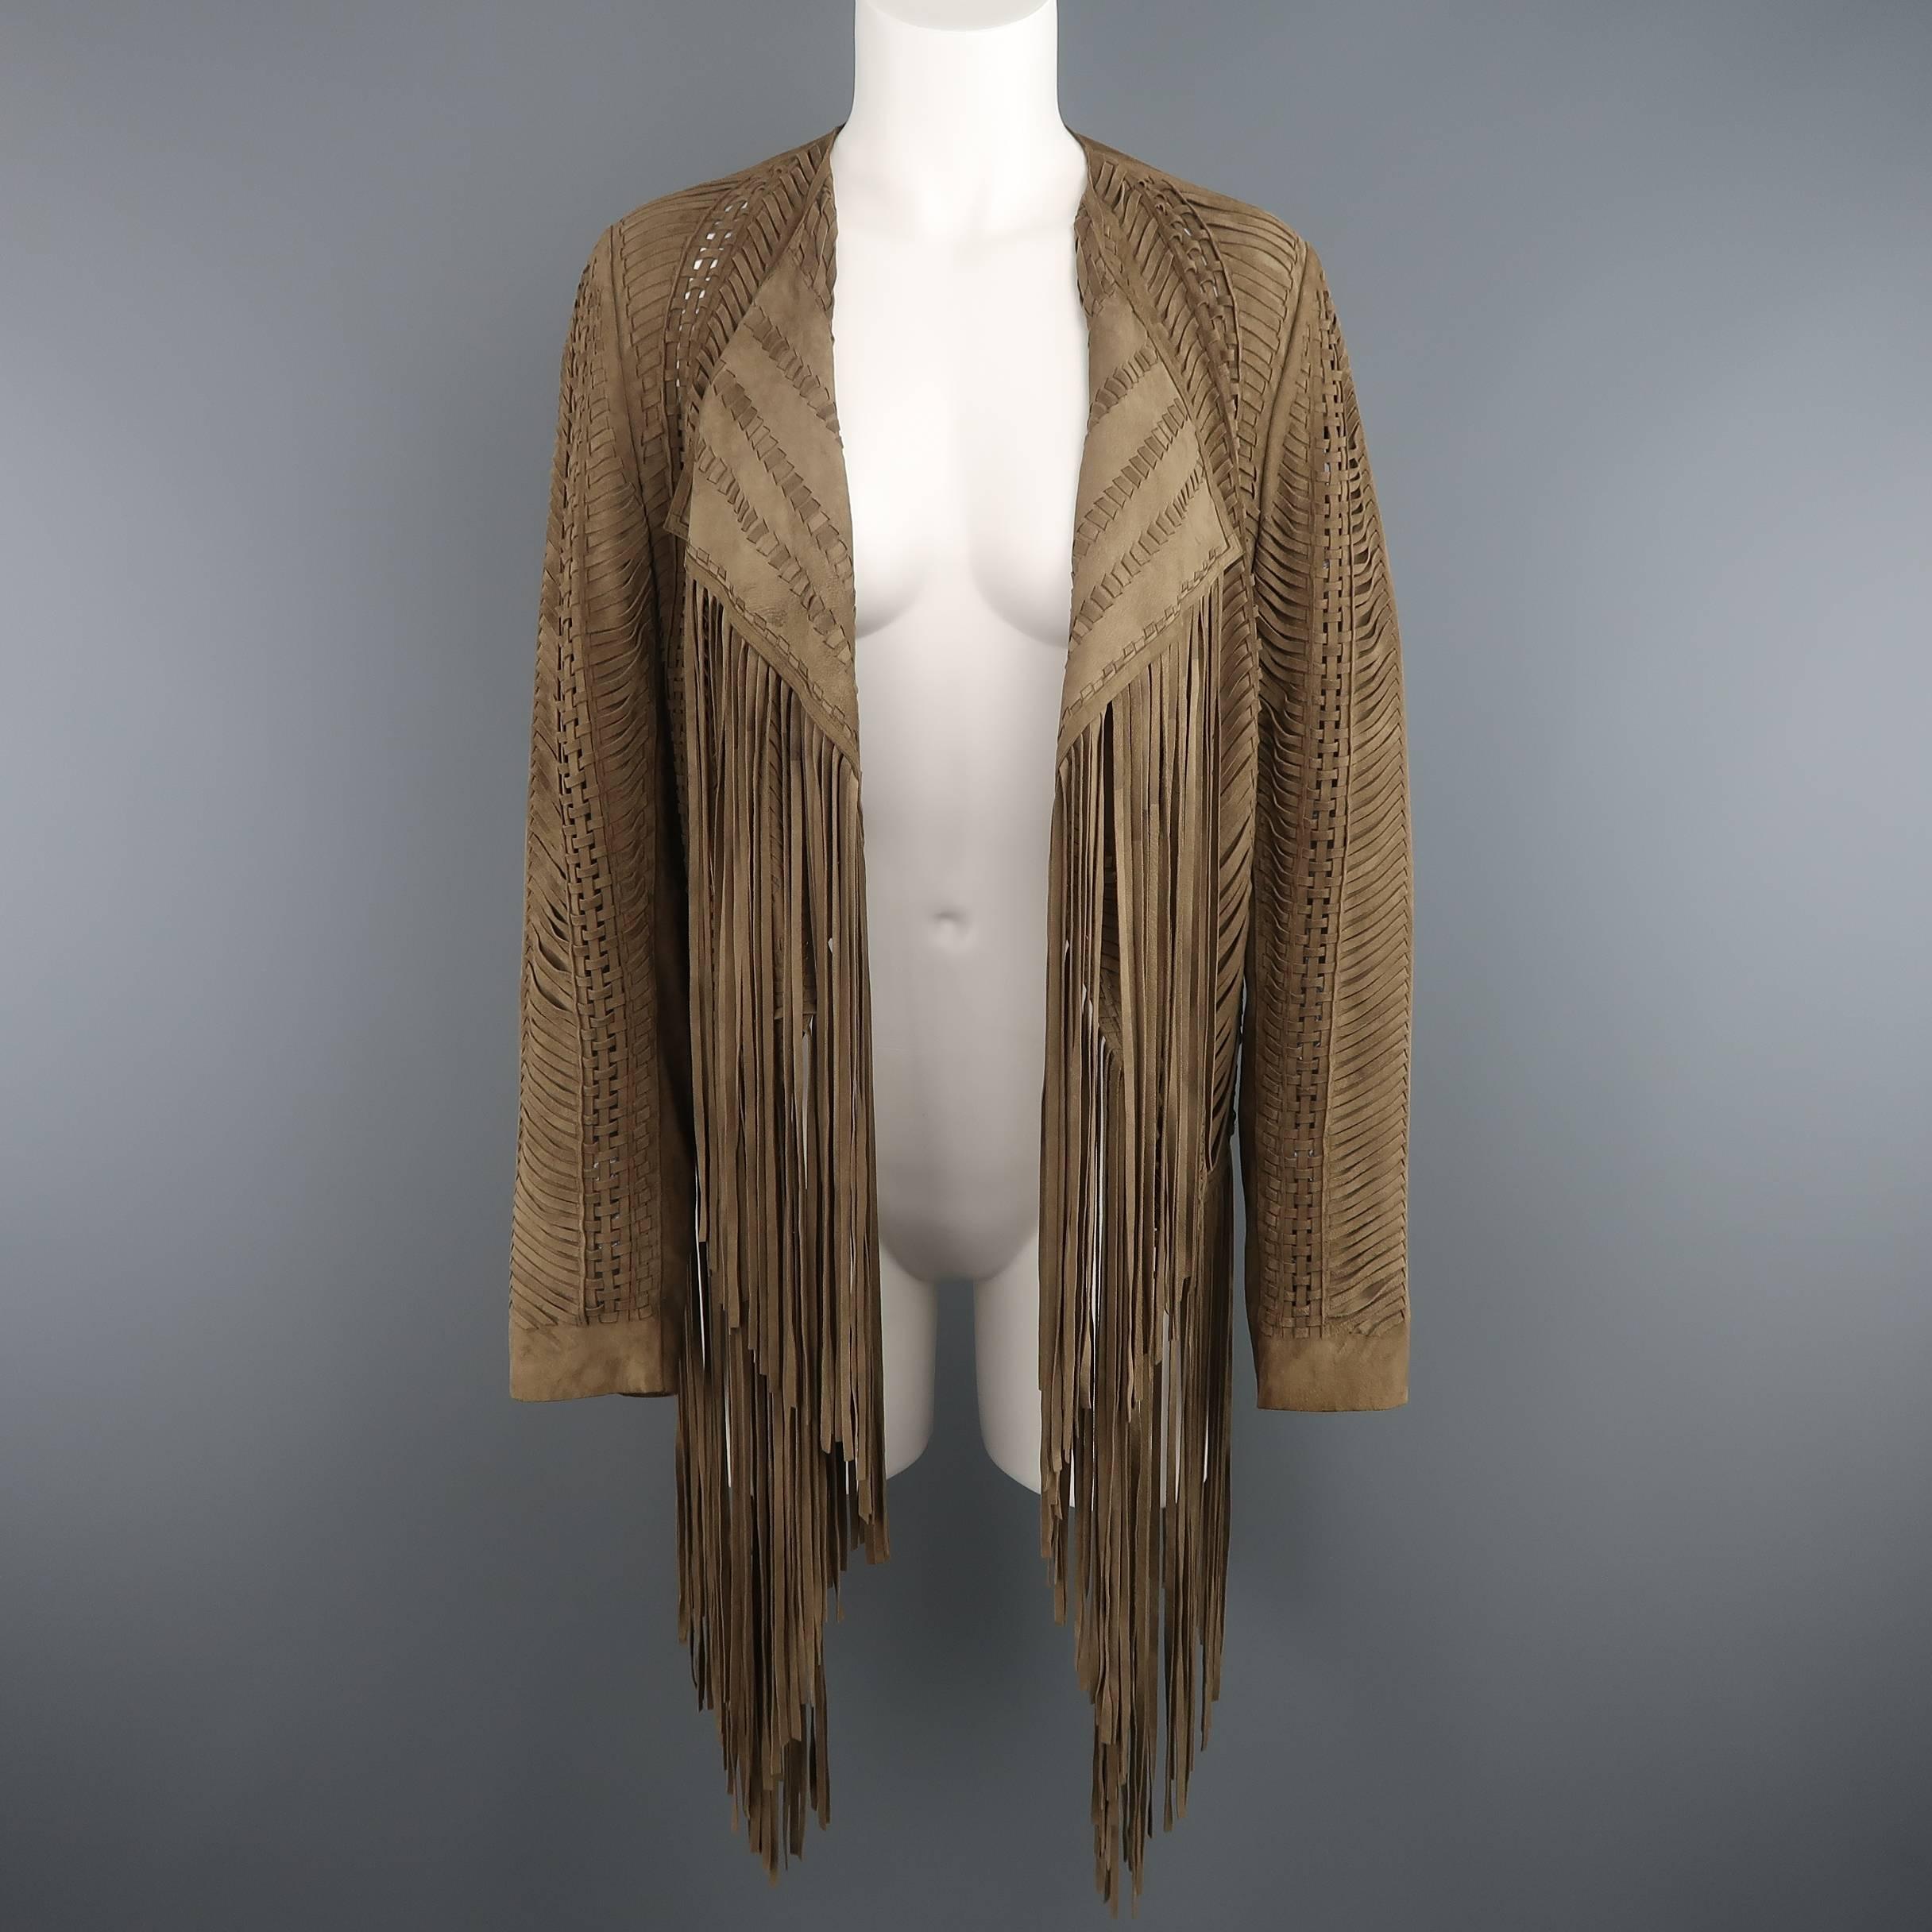 Women's RALPH LAUREN COLLECTION Size 6 Olive Taupe Woven Fringe Jacket - Retail $4500